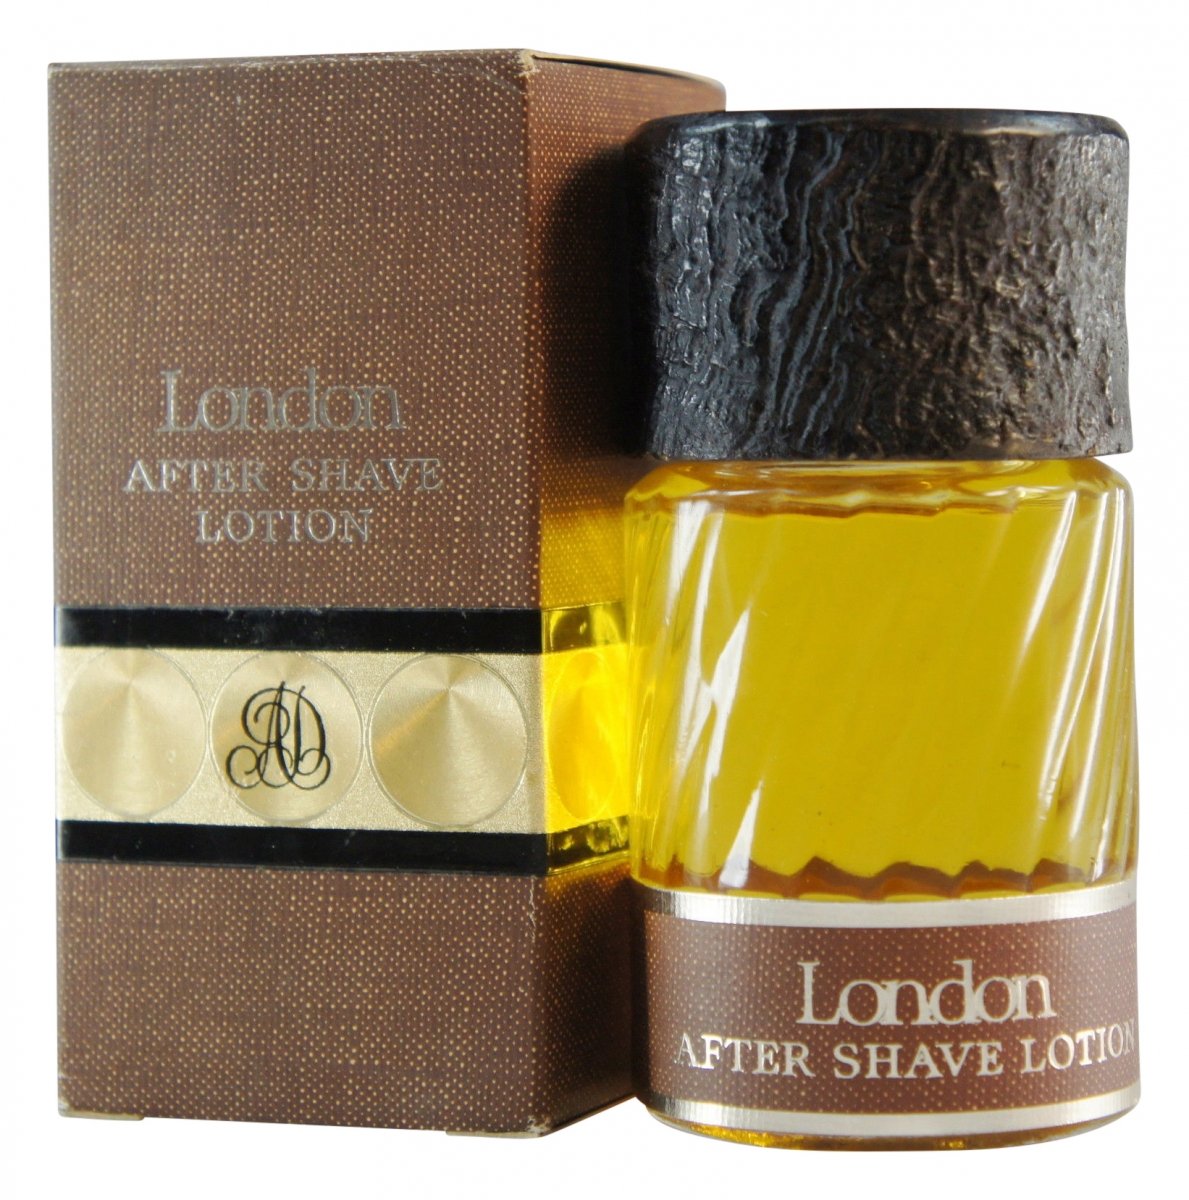 London by Dunhill (After Shave Lotion) » Reviews & Perfume Facts